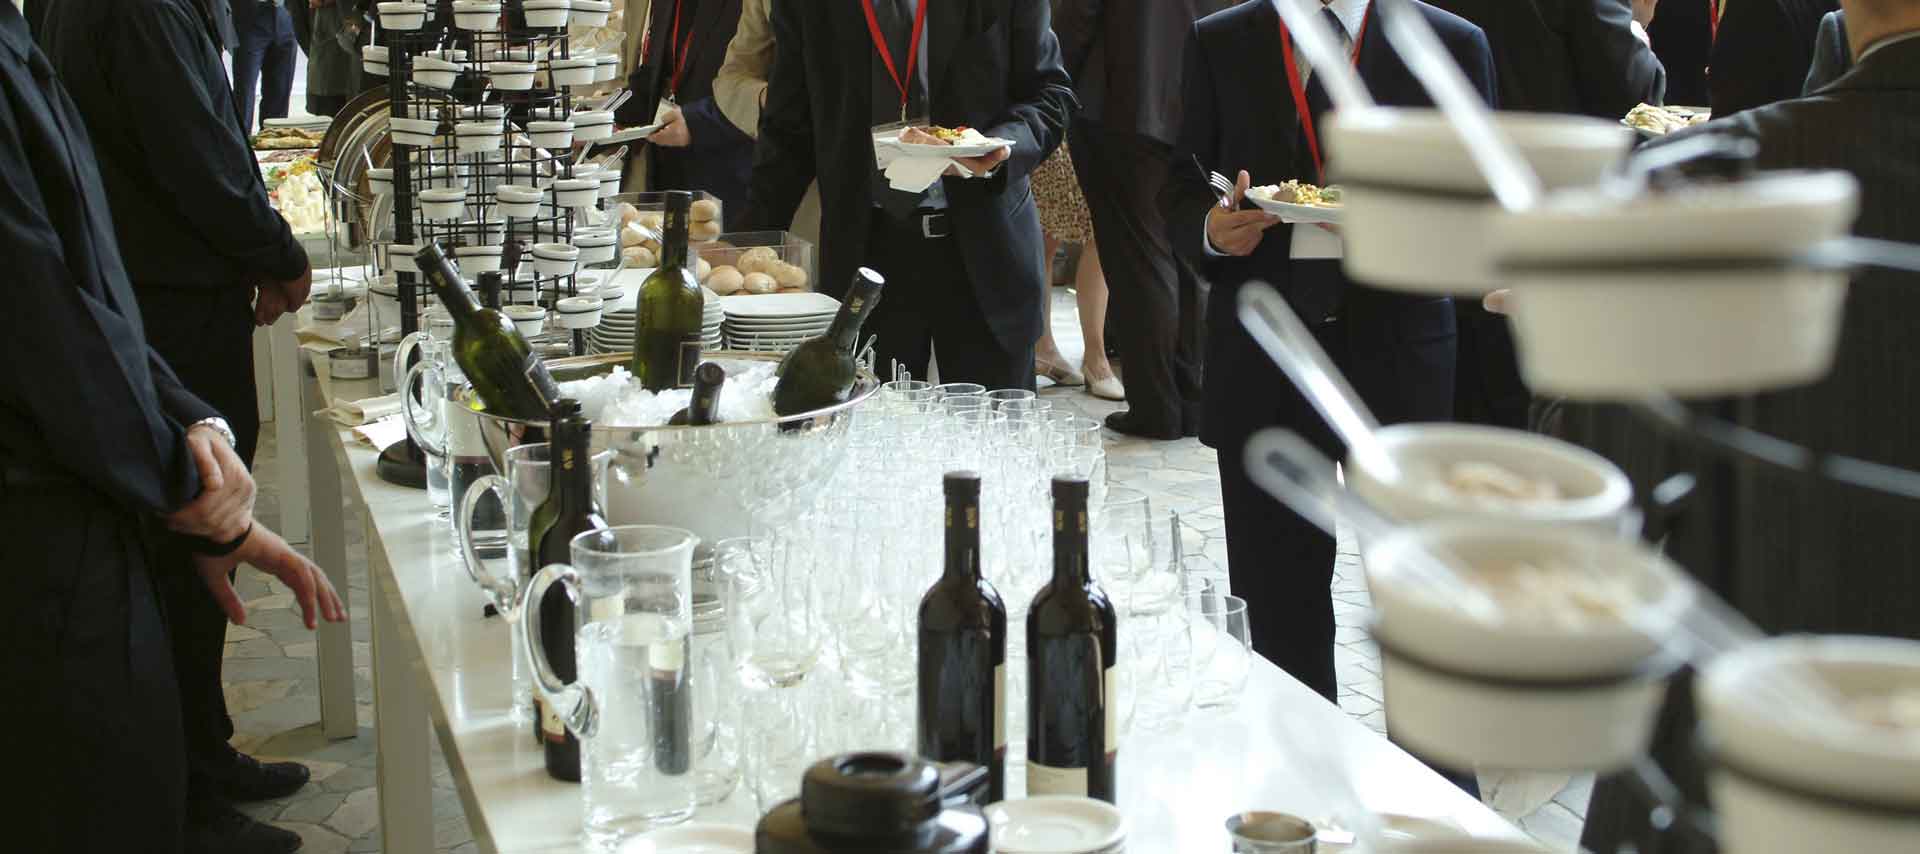 make-your-conference-run-smoothly-catering